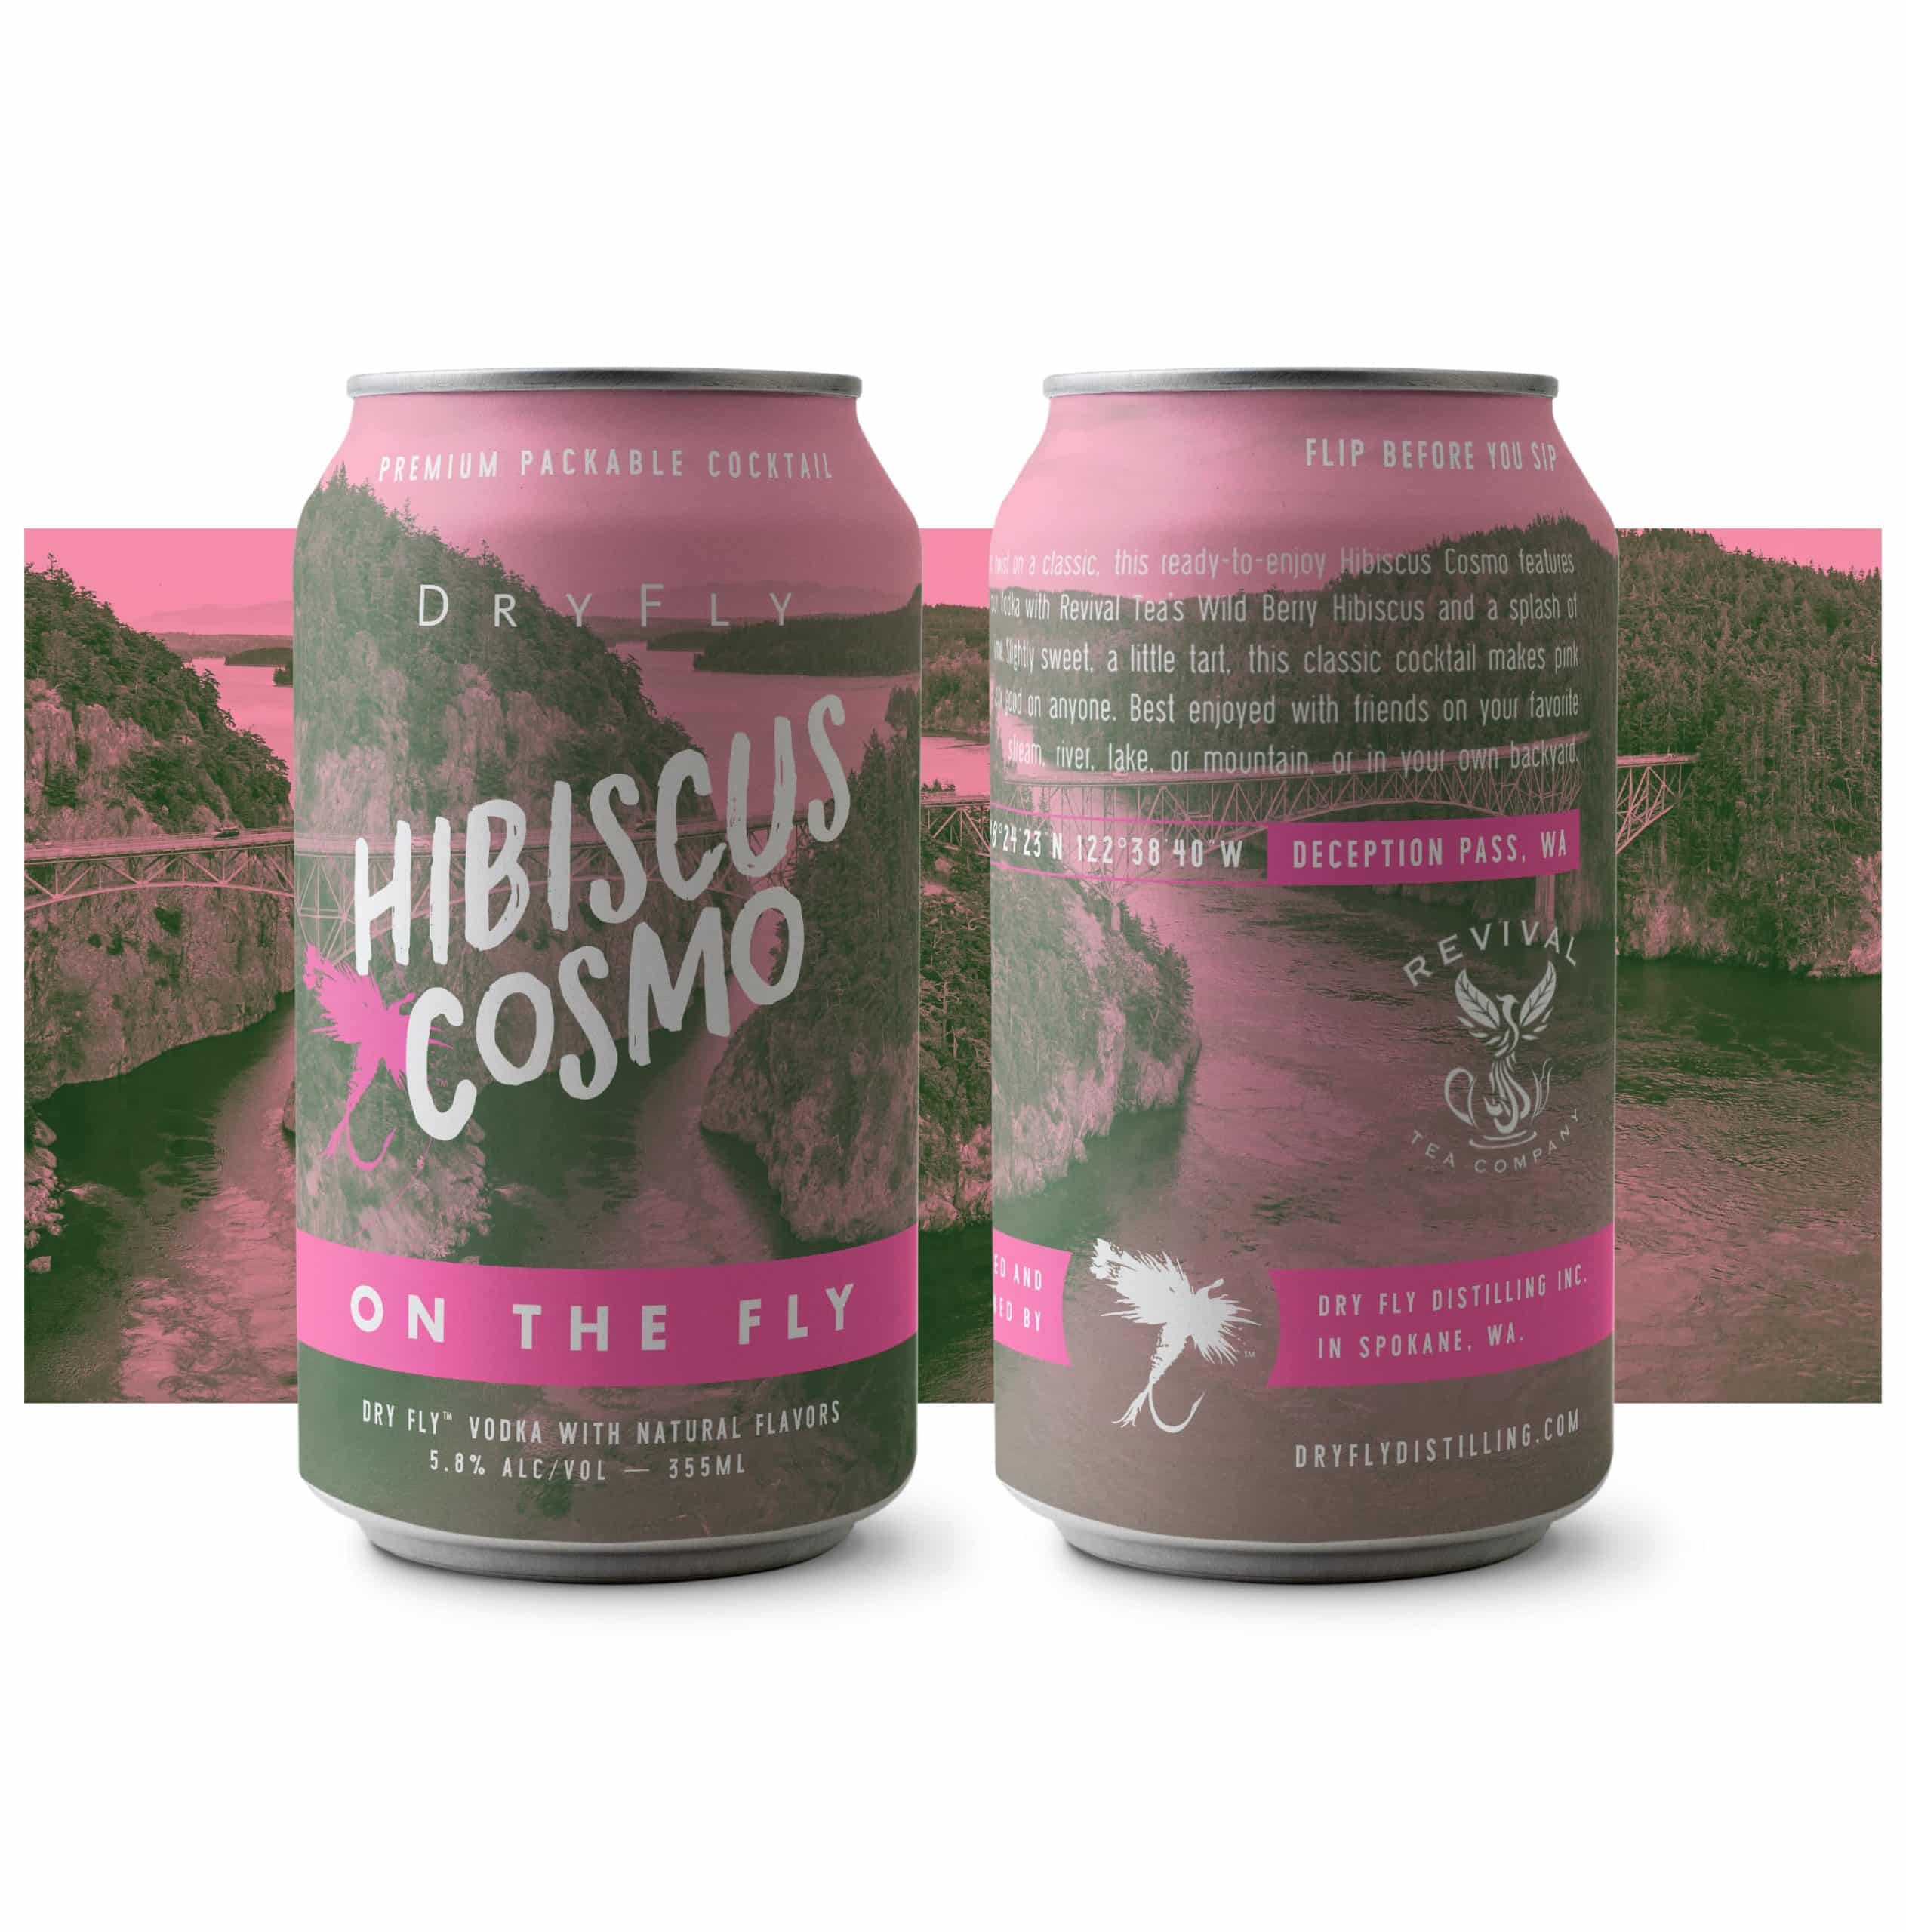 Dry Fly Hibiscus Cosmo Canned Cocktail